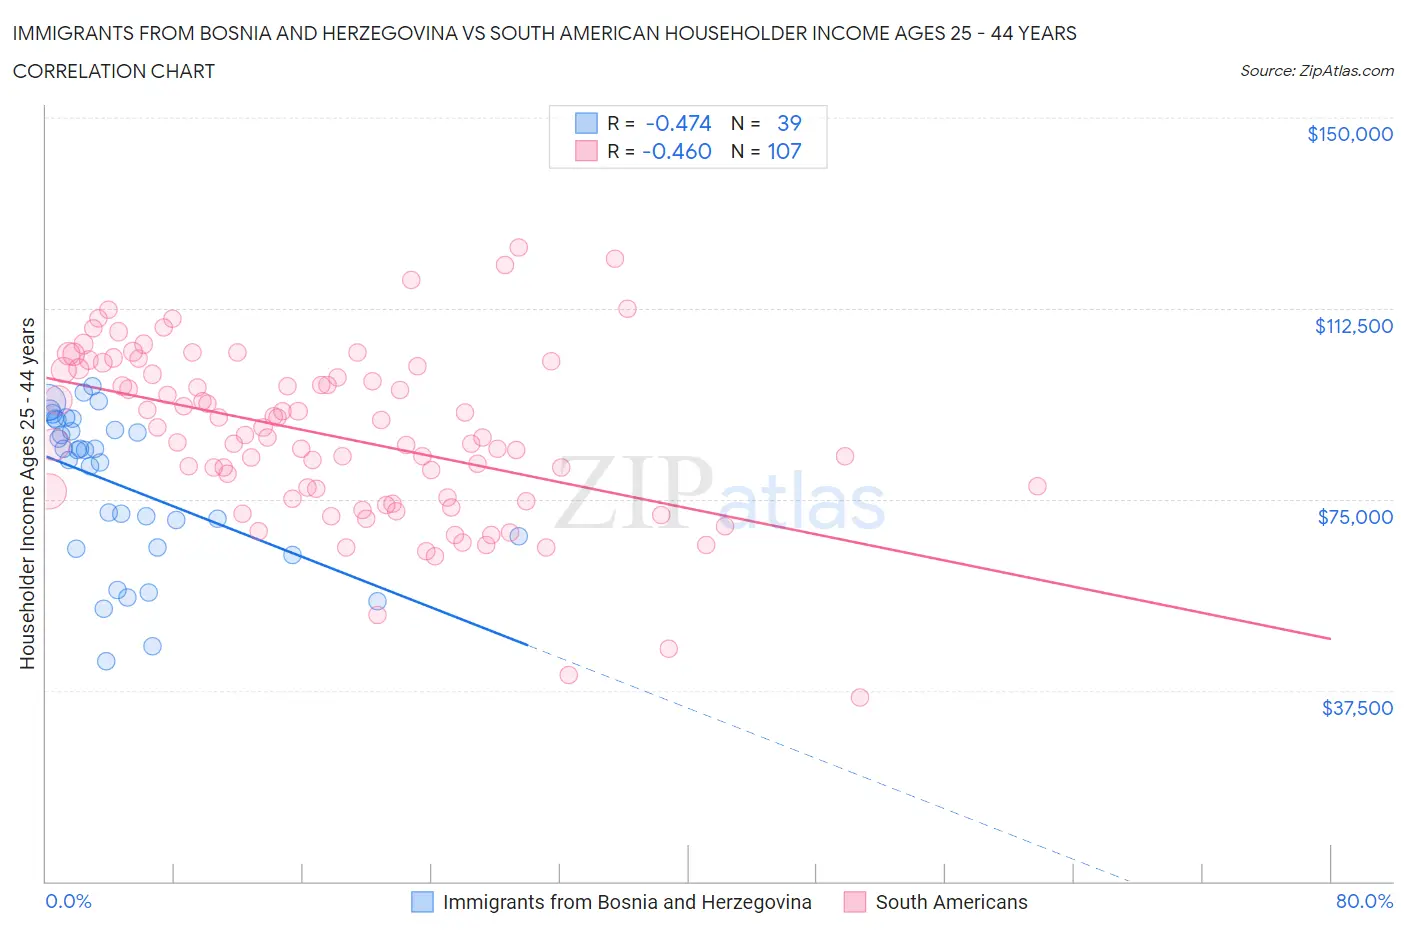 Immigrants from Bosnia and Herzegovina vs South American Householder Income Ages 25 - 44 years